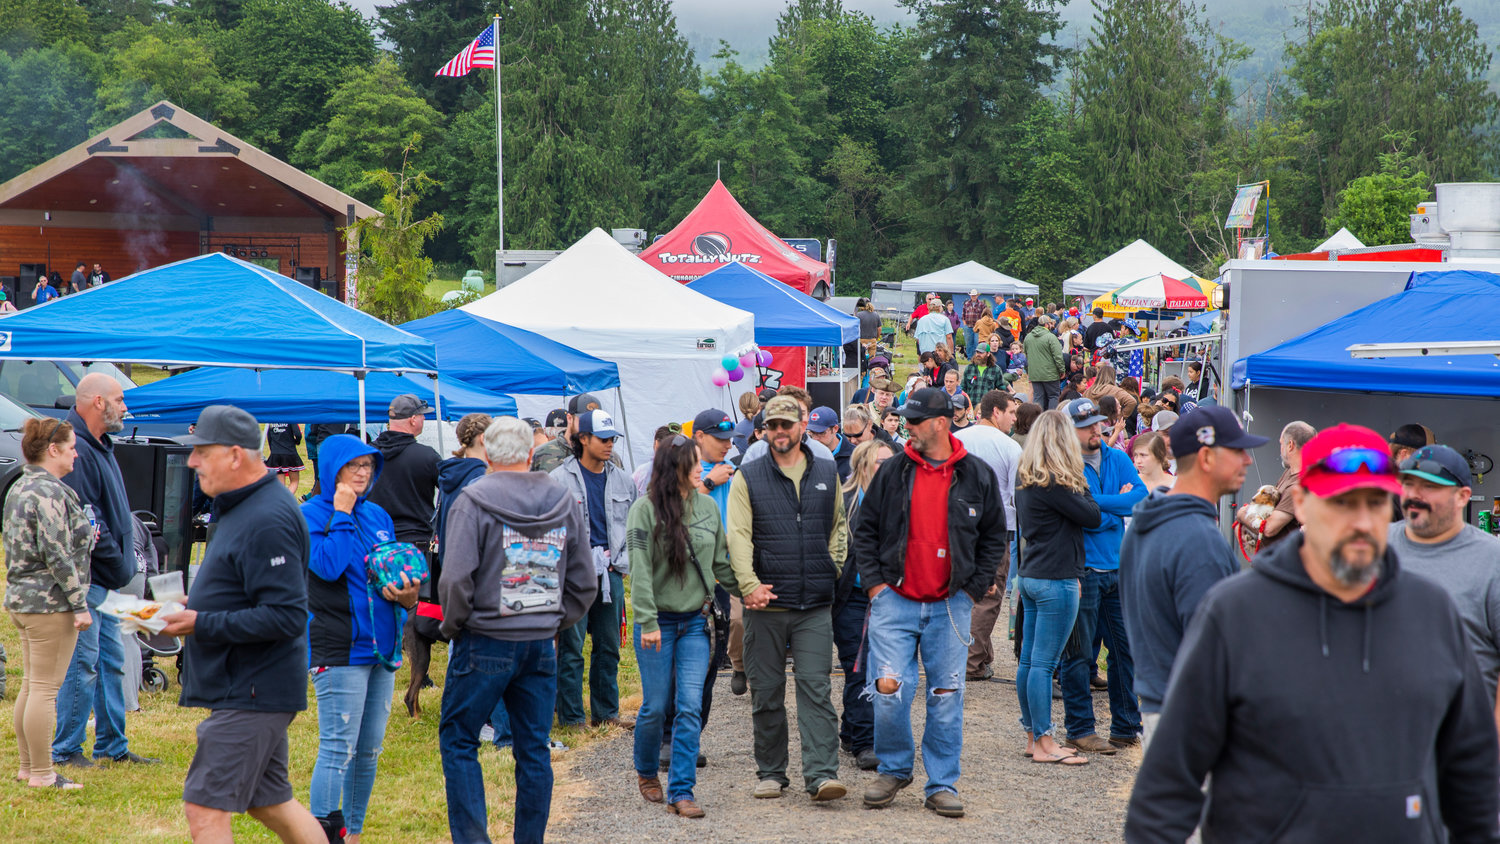 Vendors and visitors fill Klickitat Prairie Park for the Mossyrock Freedom Festival on Saturday.